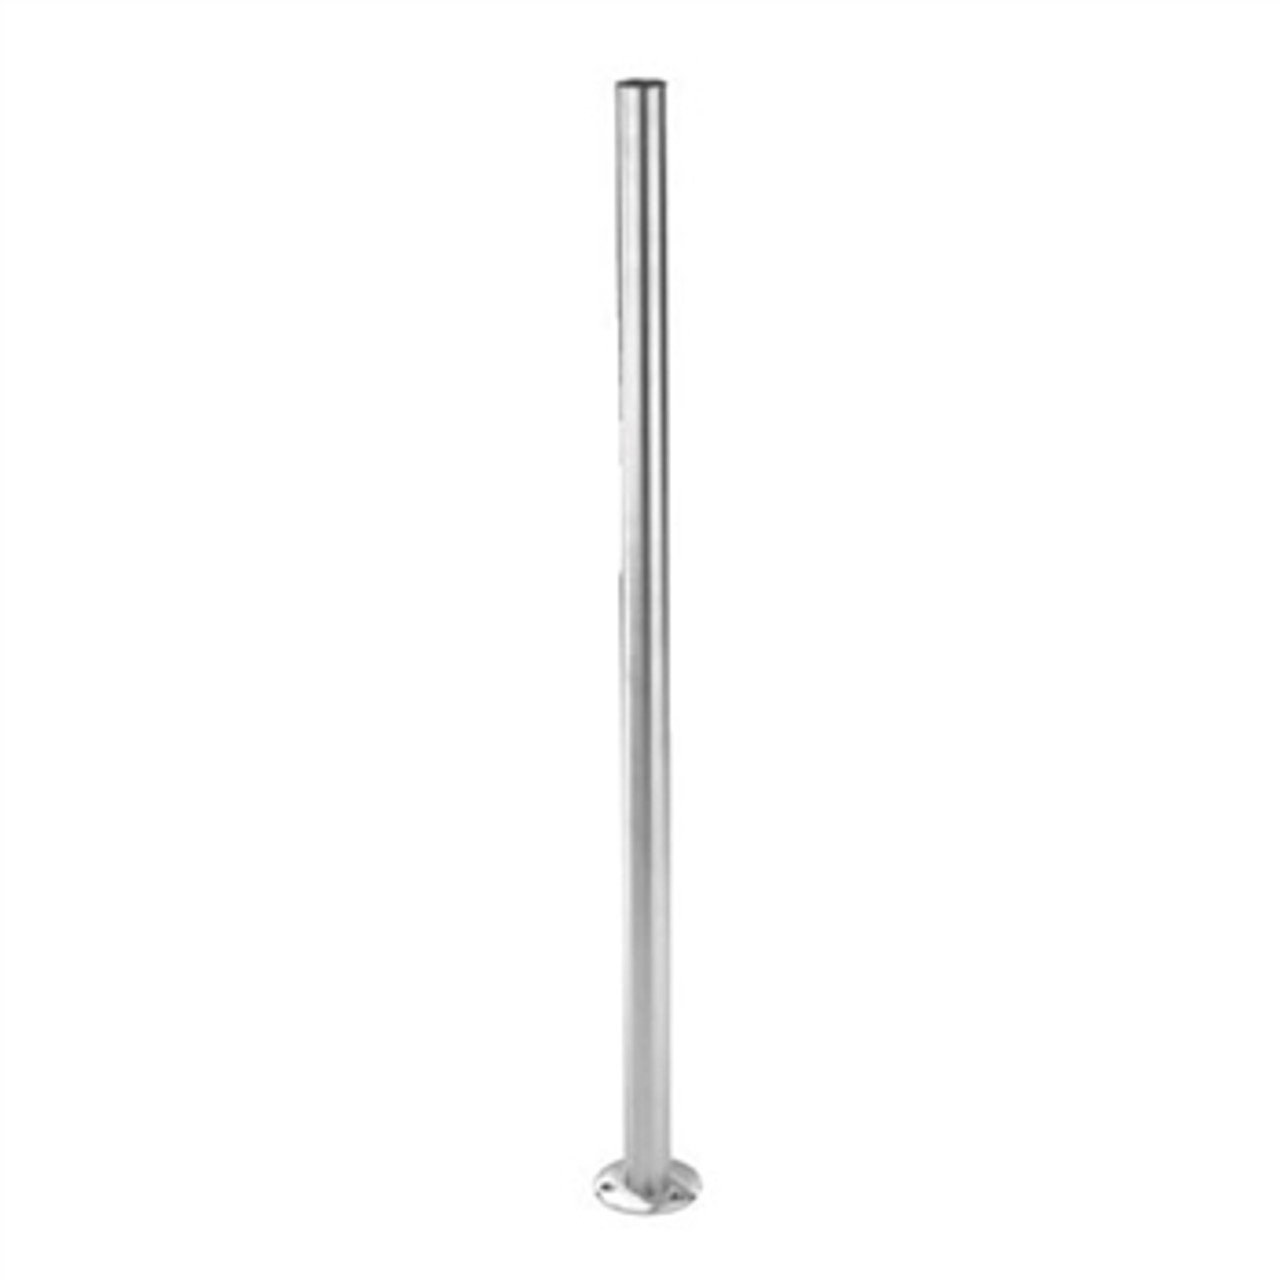 E0042/4 Stainless Steel 1 2/3" Newel Post, Pre-drilled with 4 Holes, M8